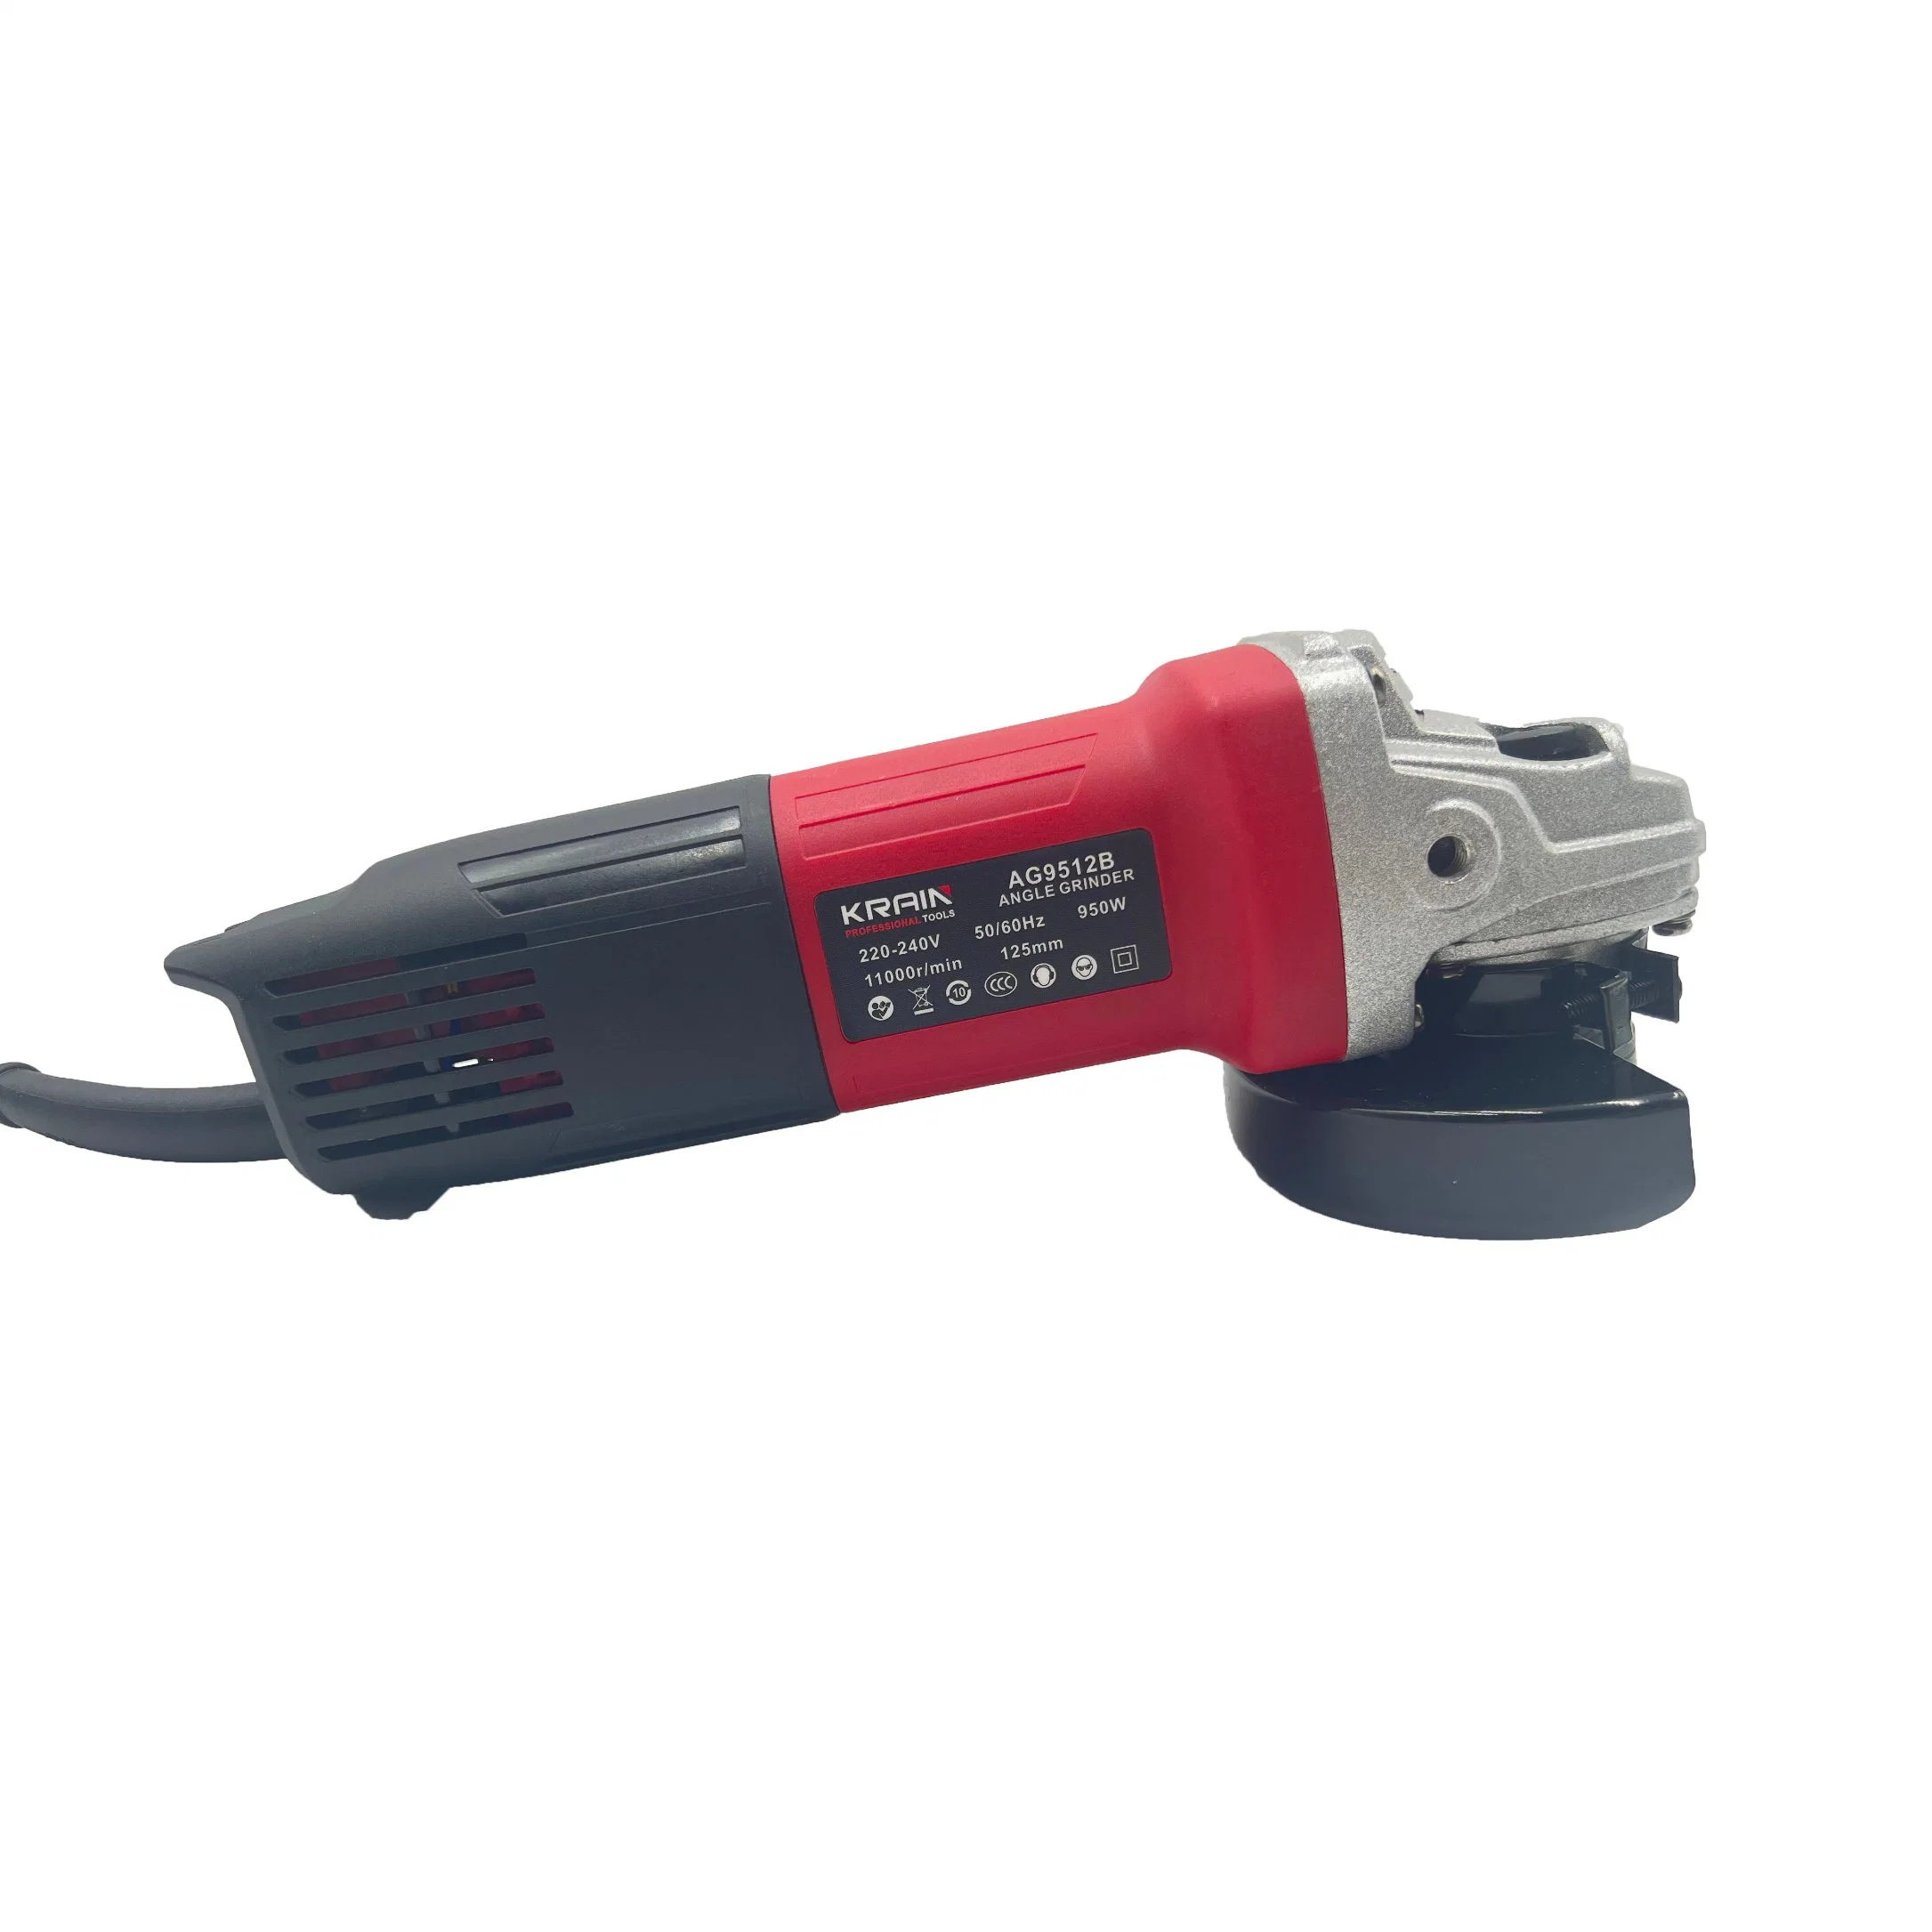 780W Electric Angle Grinder Grinding Machine Power Tools 115mm